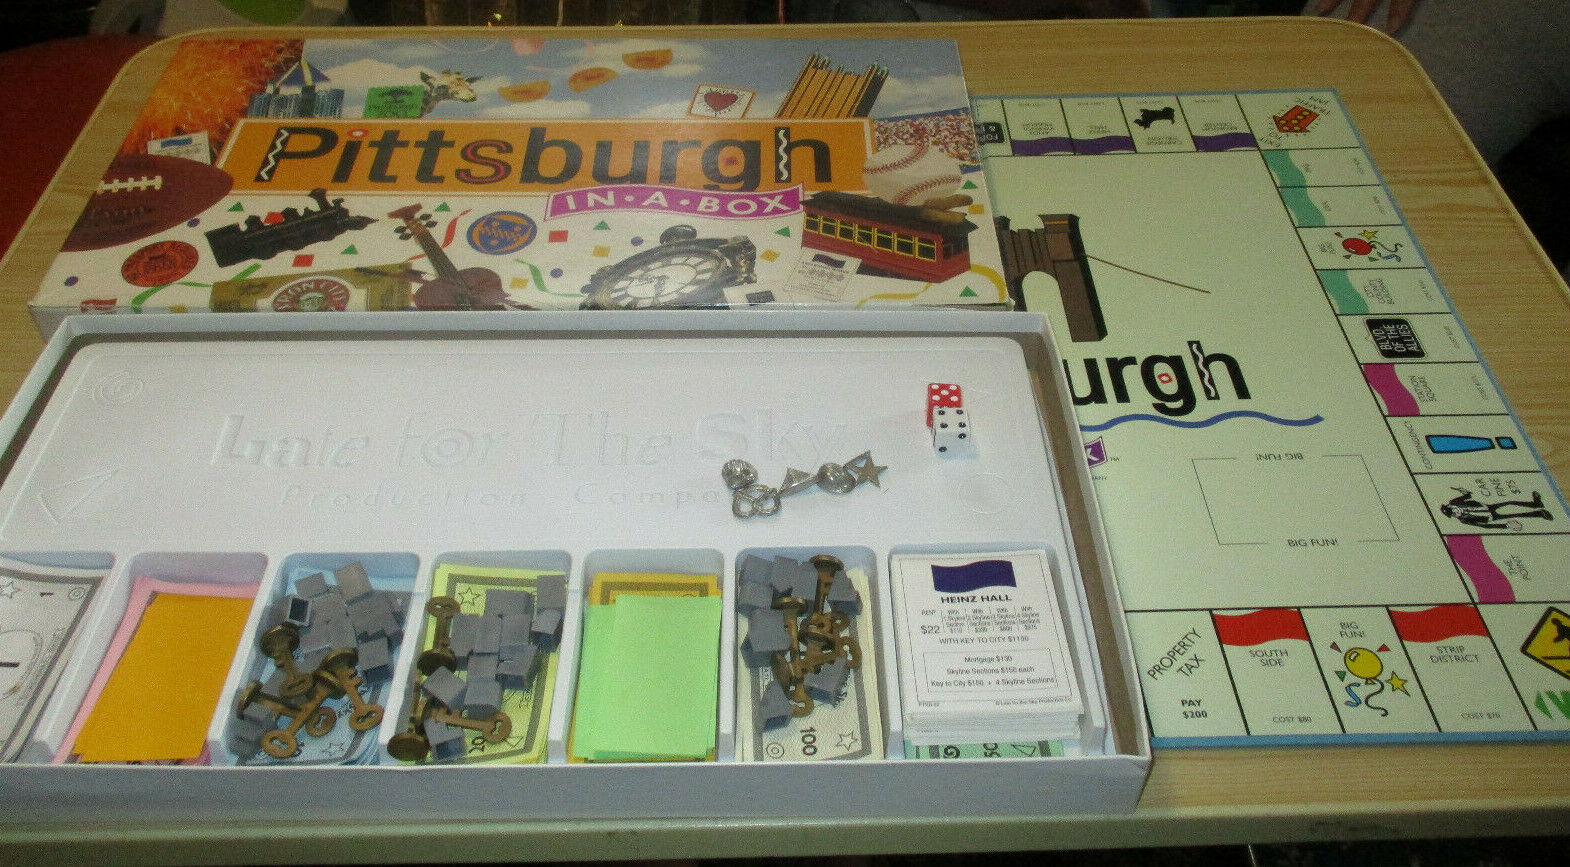 PITTSBURGH PA. In A Box - Monopoly Style Board Game By Late For The Sky 1990